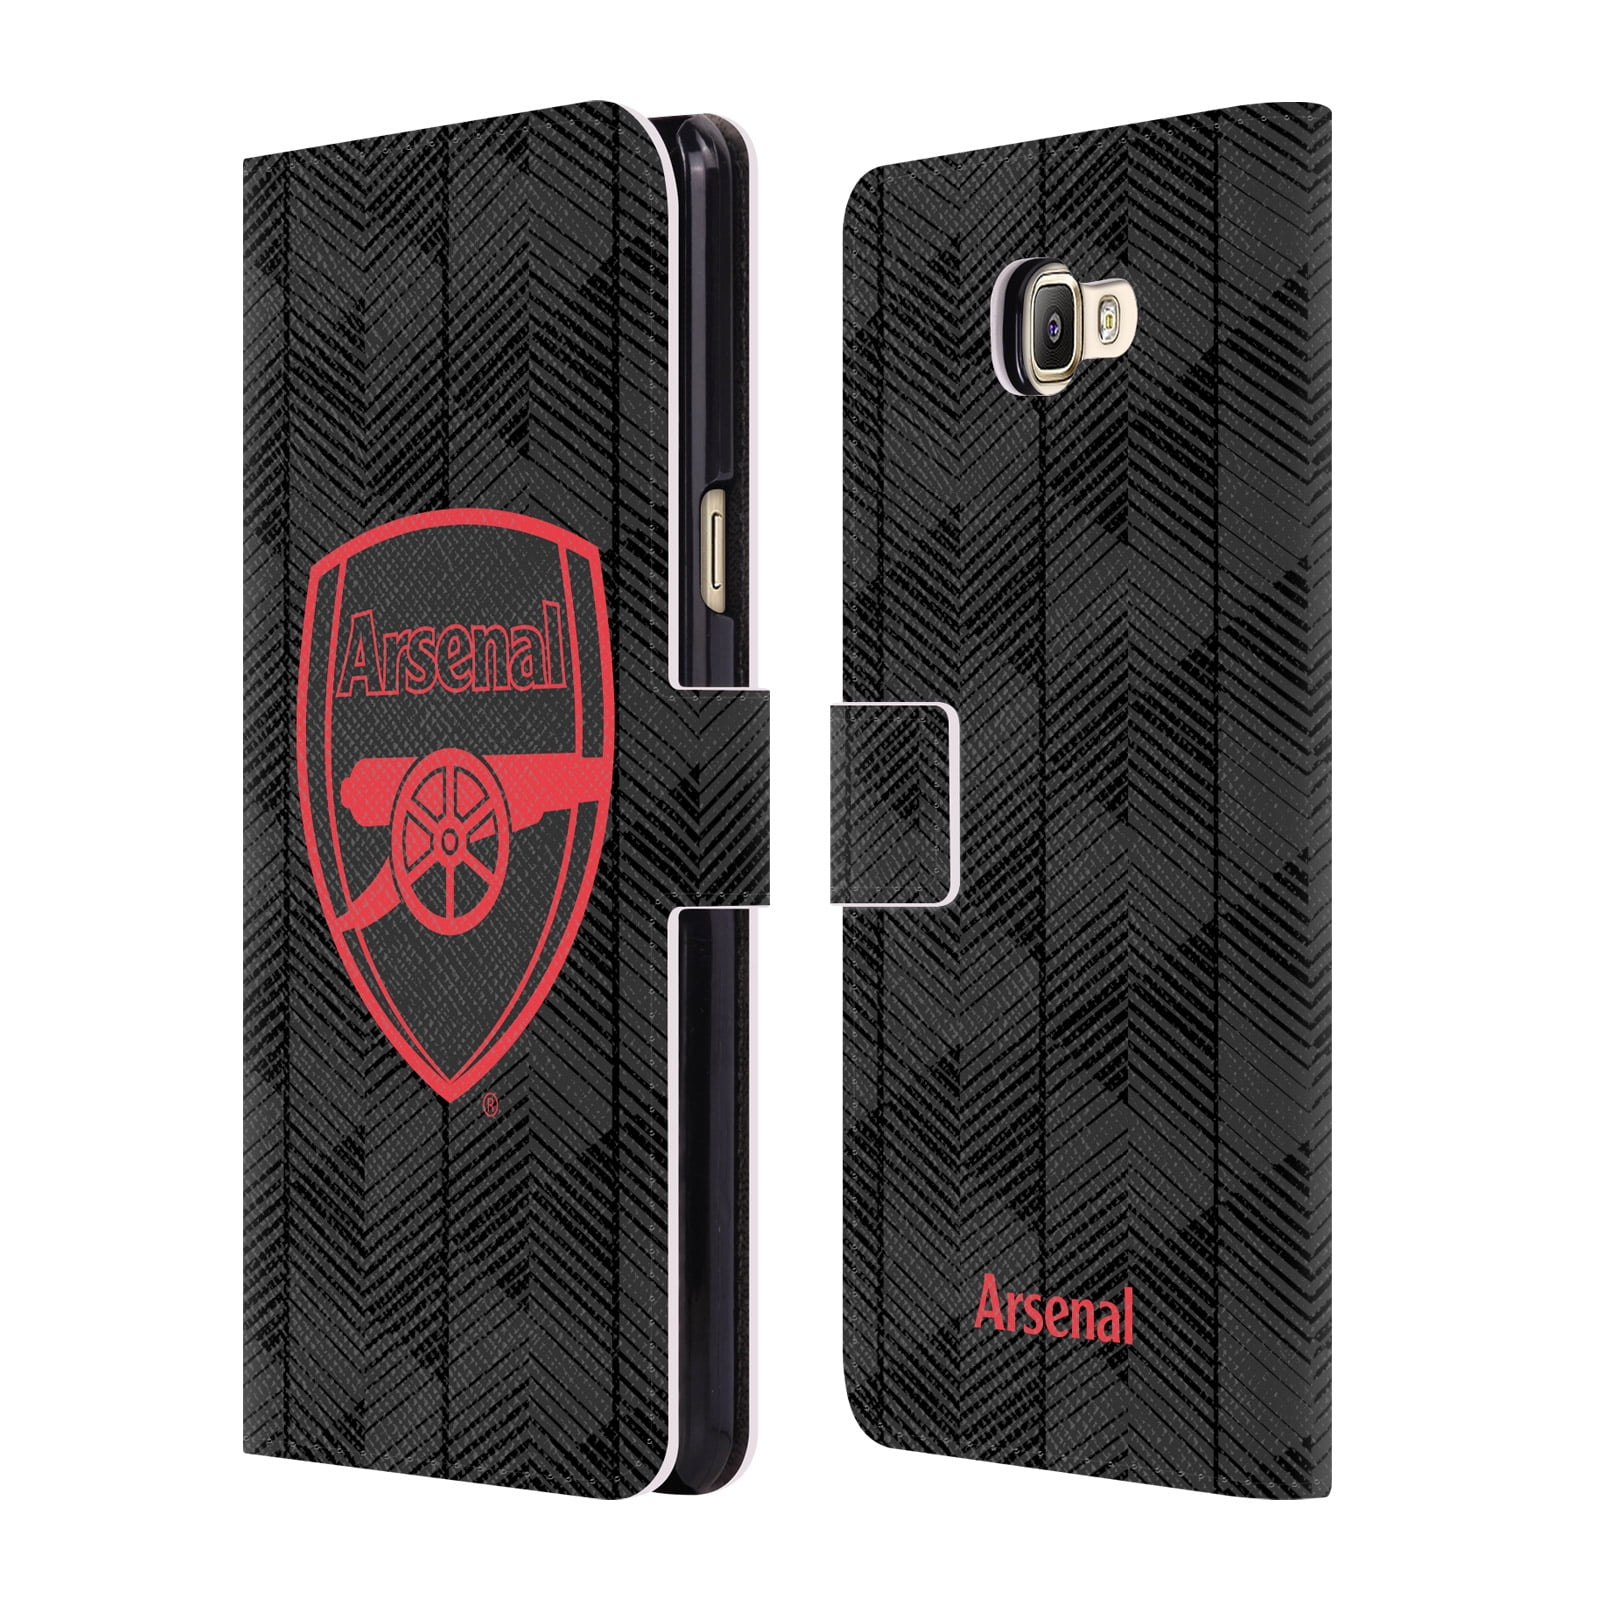 OFFICIAL ARSENAL FC 2018/19 CREST AND GUNNERS LOGO LEATHER ...